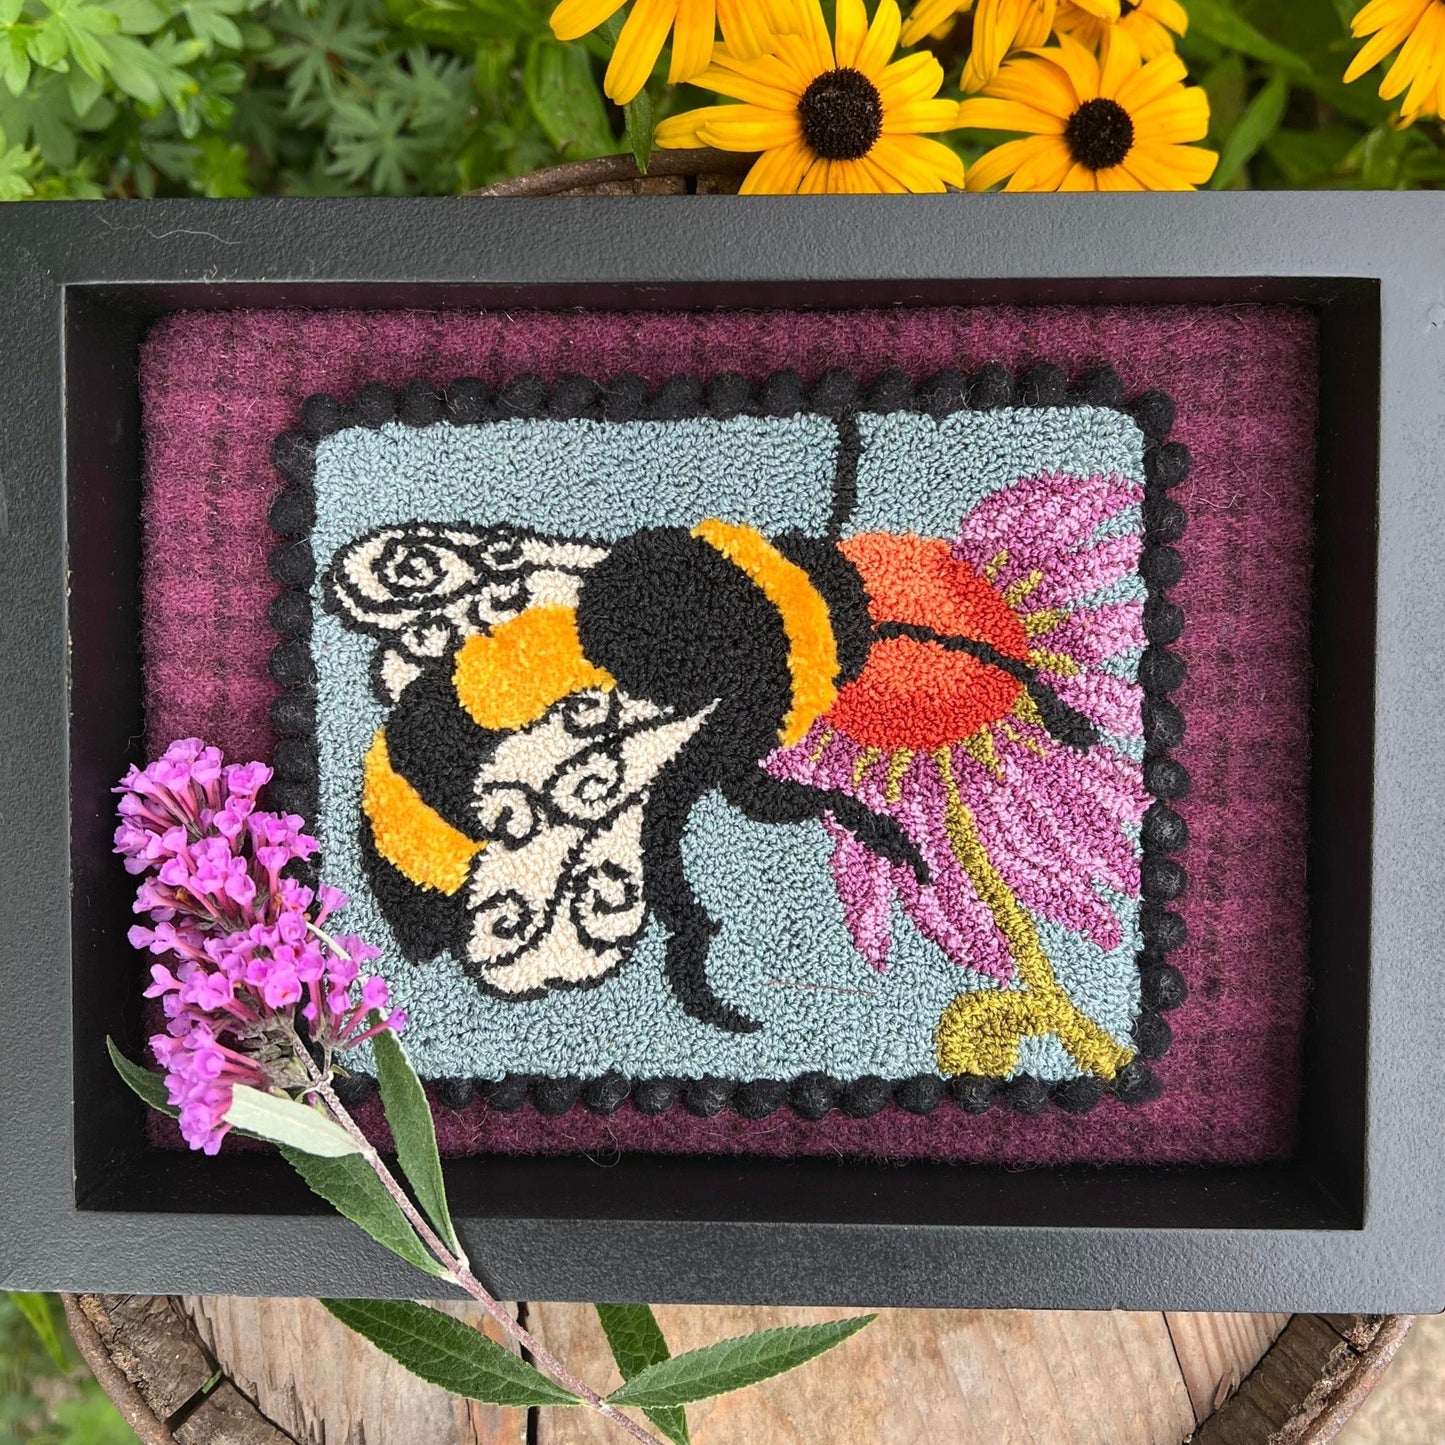 A Bee's Kiss- Needle Punch Pattern by Orphaned Wool, Copyright © 2023 Kelly Kanyok. This pattern is available as a Printed on Cloth pattern or Paper Pattern.  The design of a bee kissing a colorful flower.